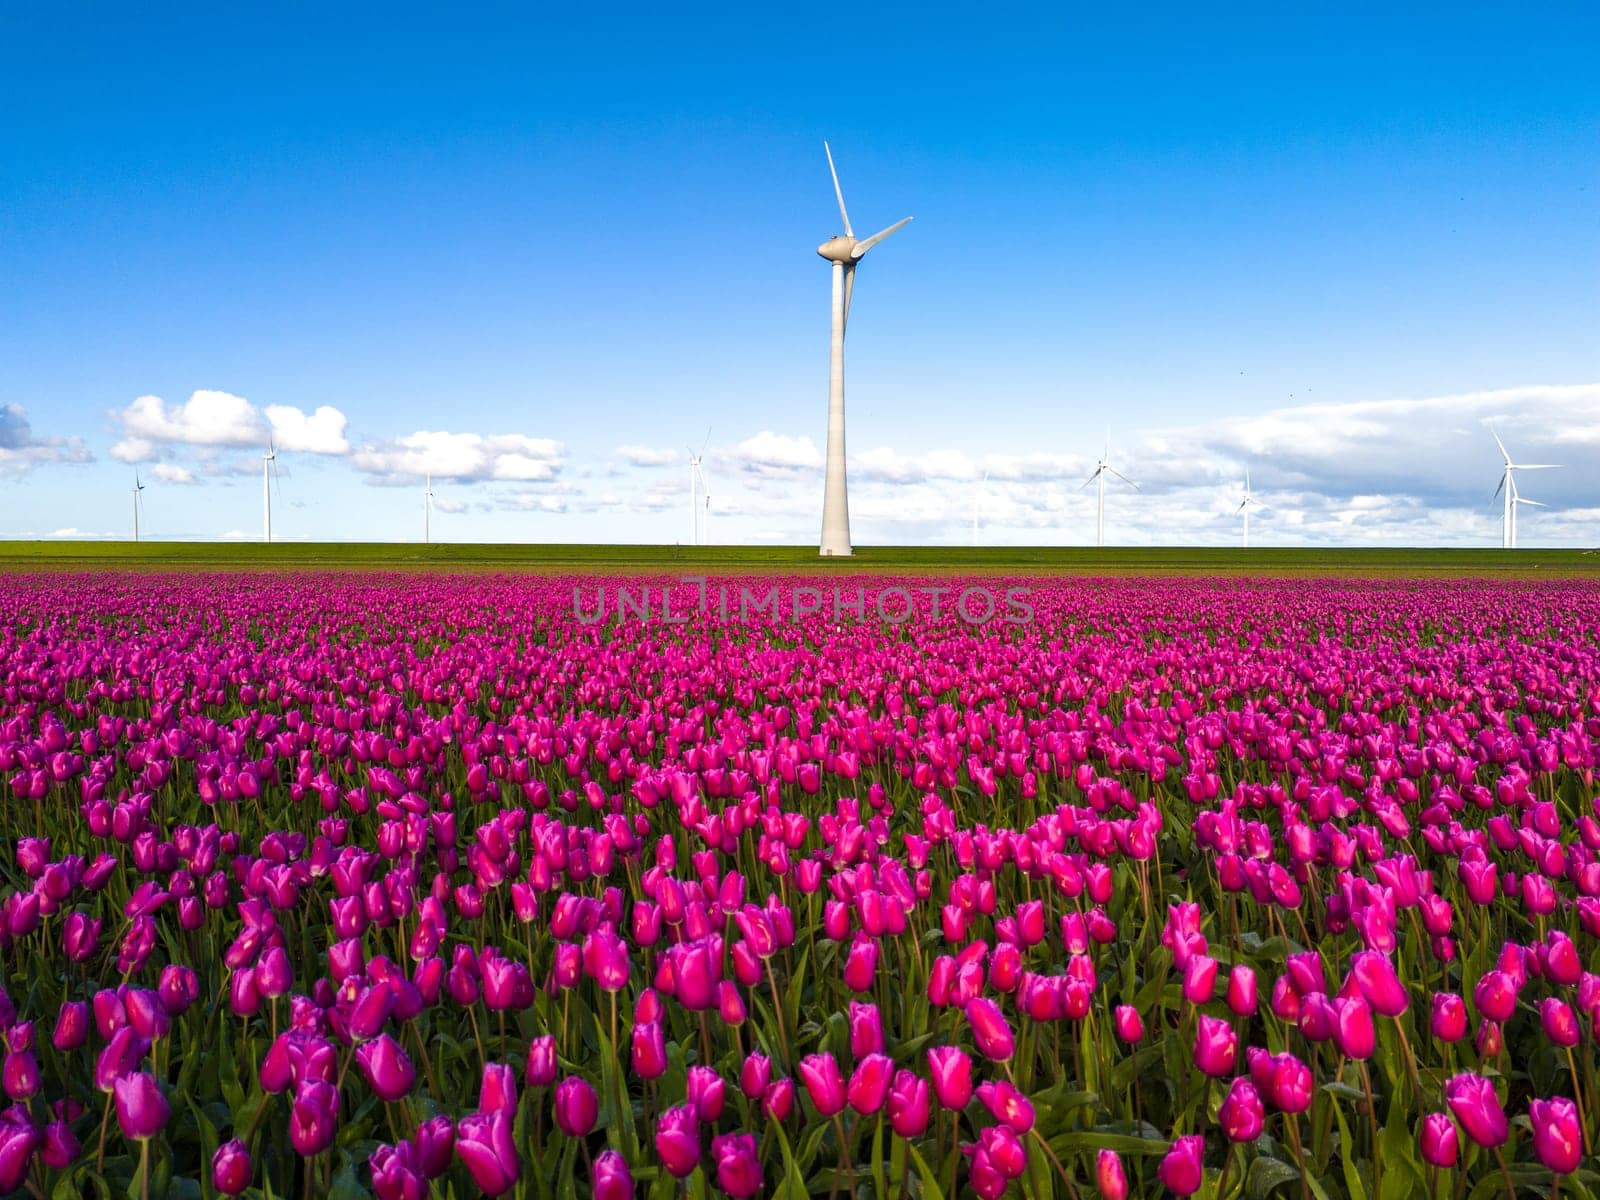 A vibrant field of pink tulips dances in the breeze, framed by the iconic silhouette of a Dutch windmill in the background by fokkebok